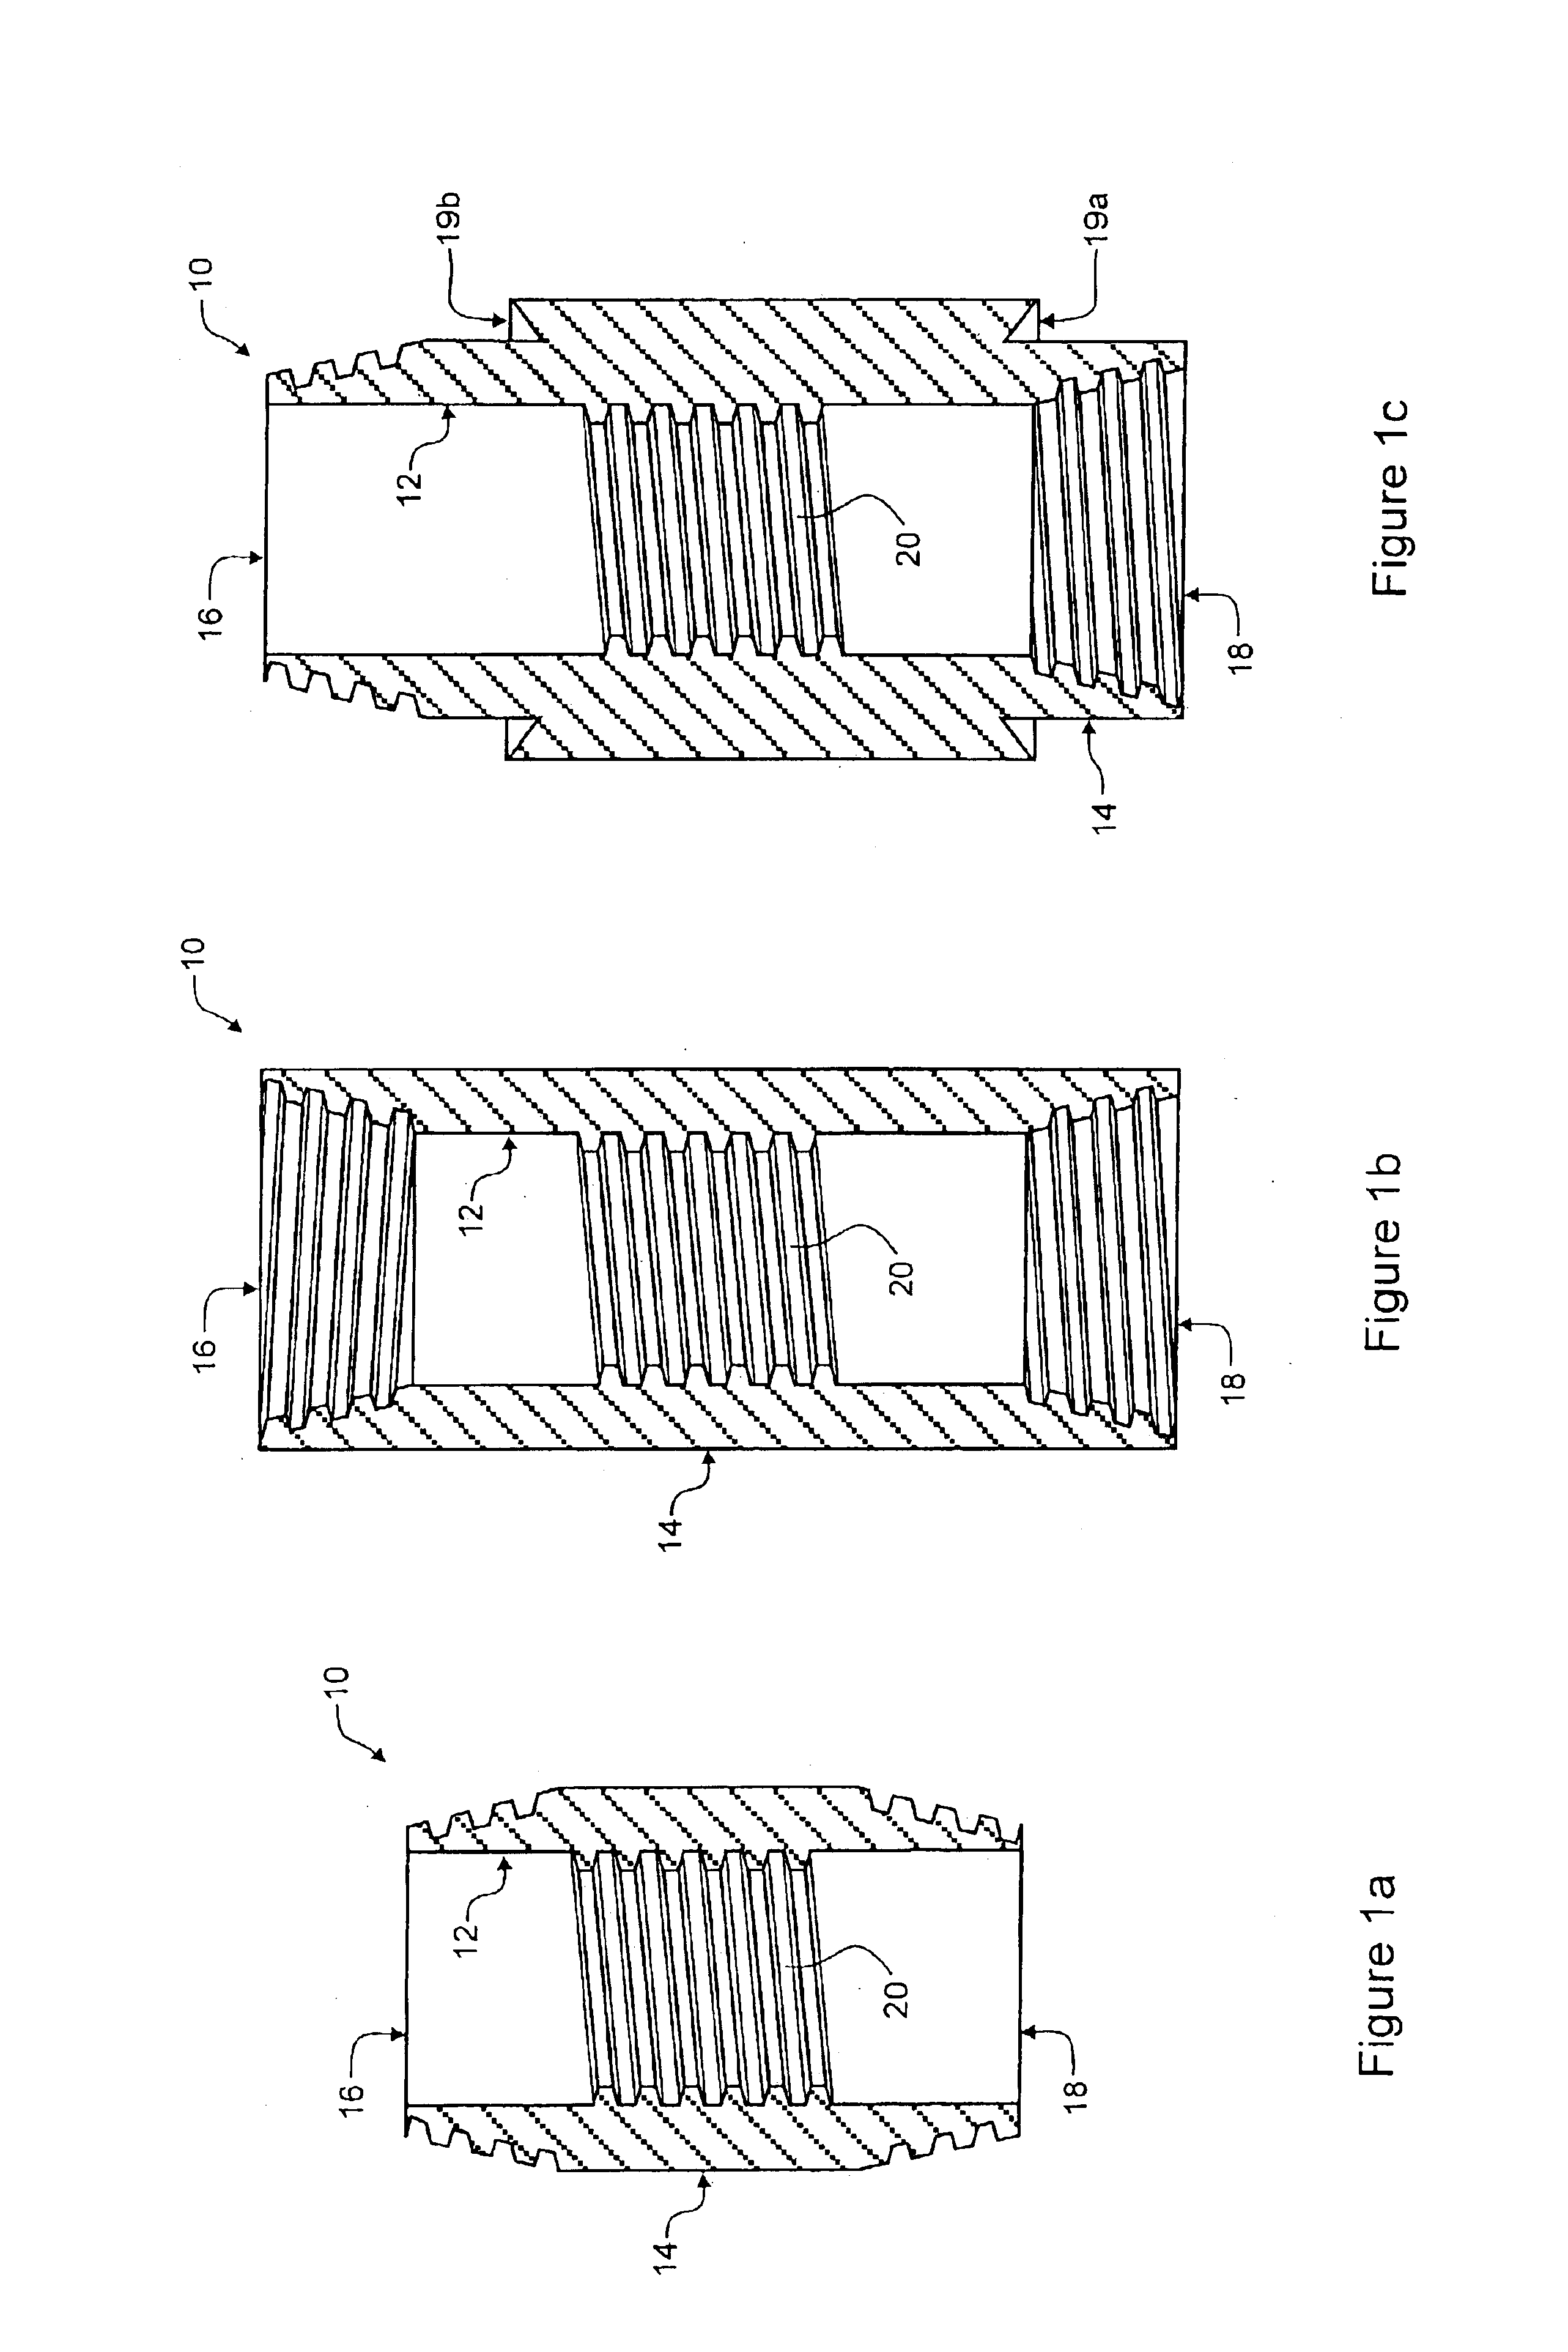 Backpressure adaptor pin and methods of use